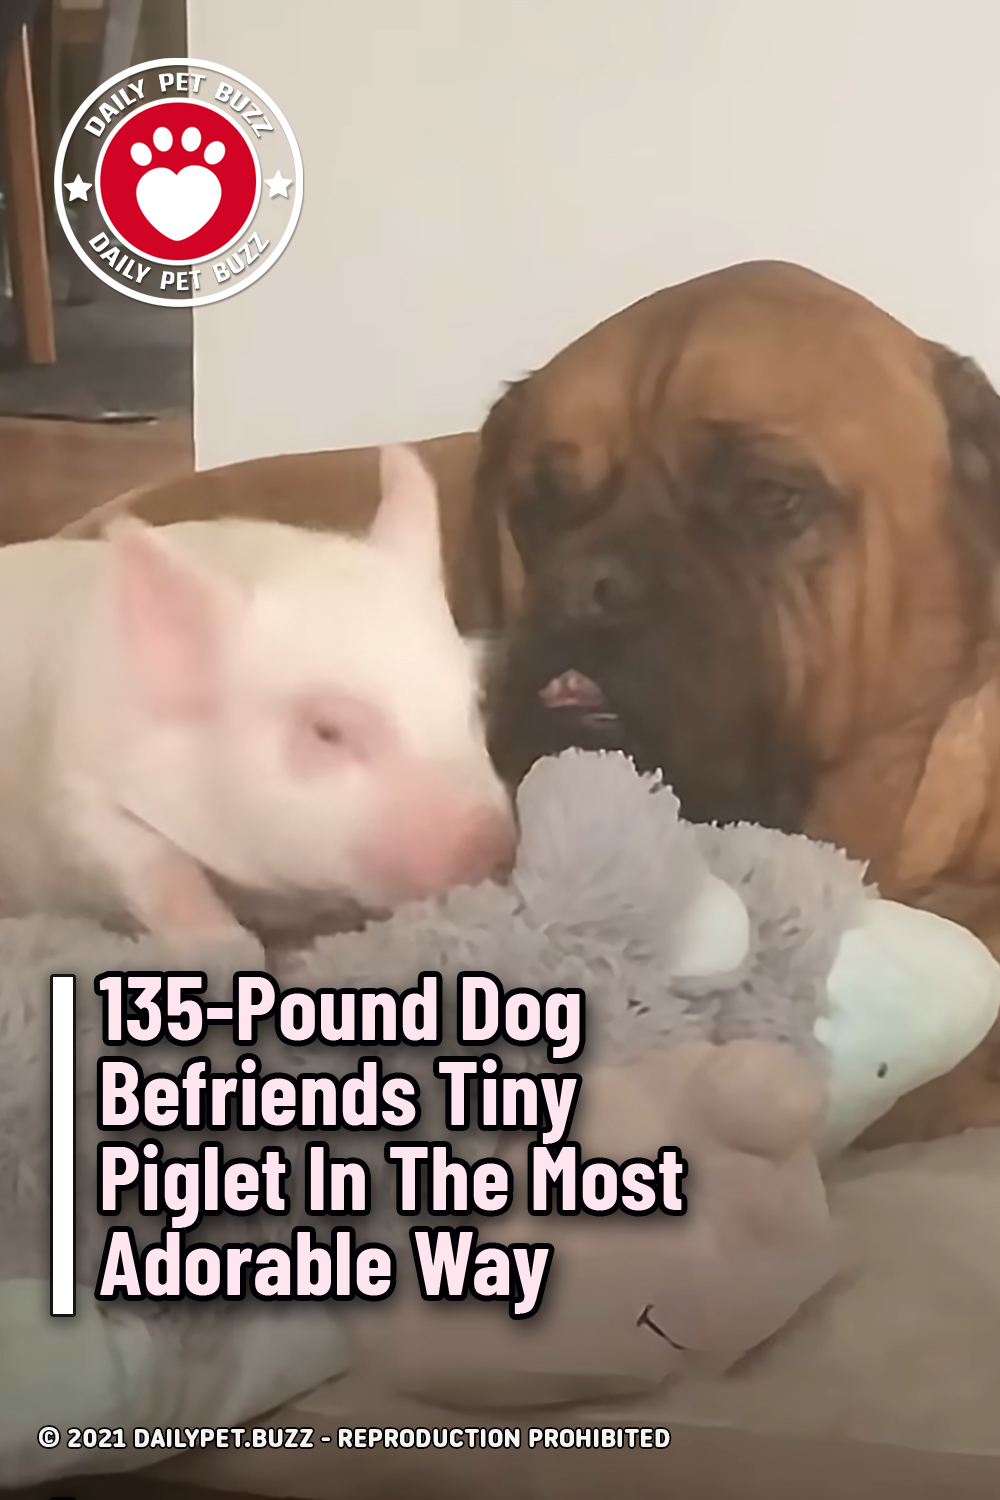 135-Pound Dog Befriends Tiny Piglet In The Most Adorable Way